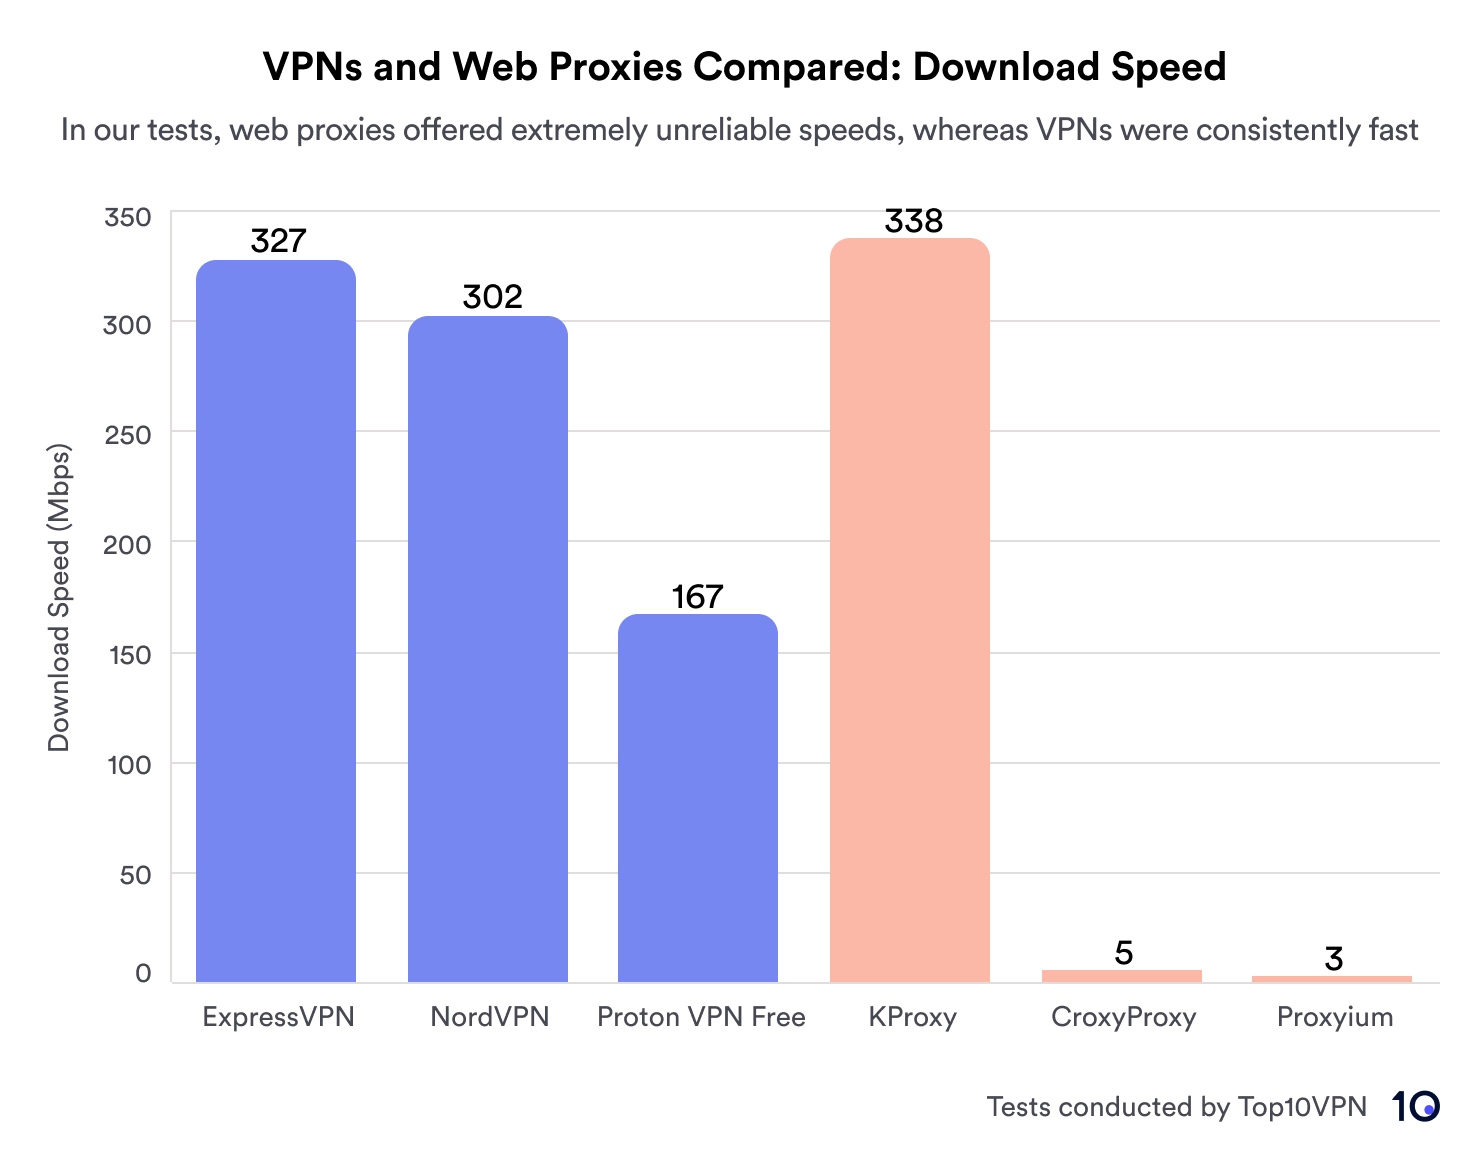 Bar chart showing VPNs offer consistently fast download speeds, whereas proxies offer slower speeds.